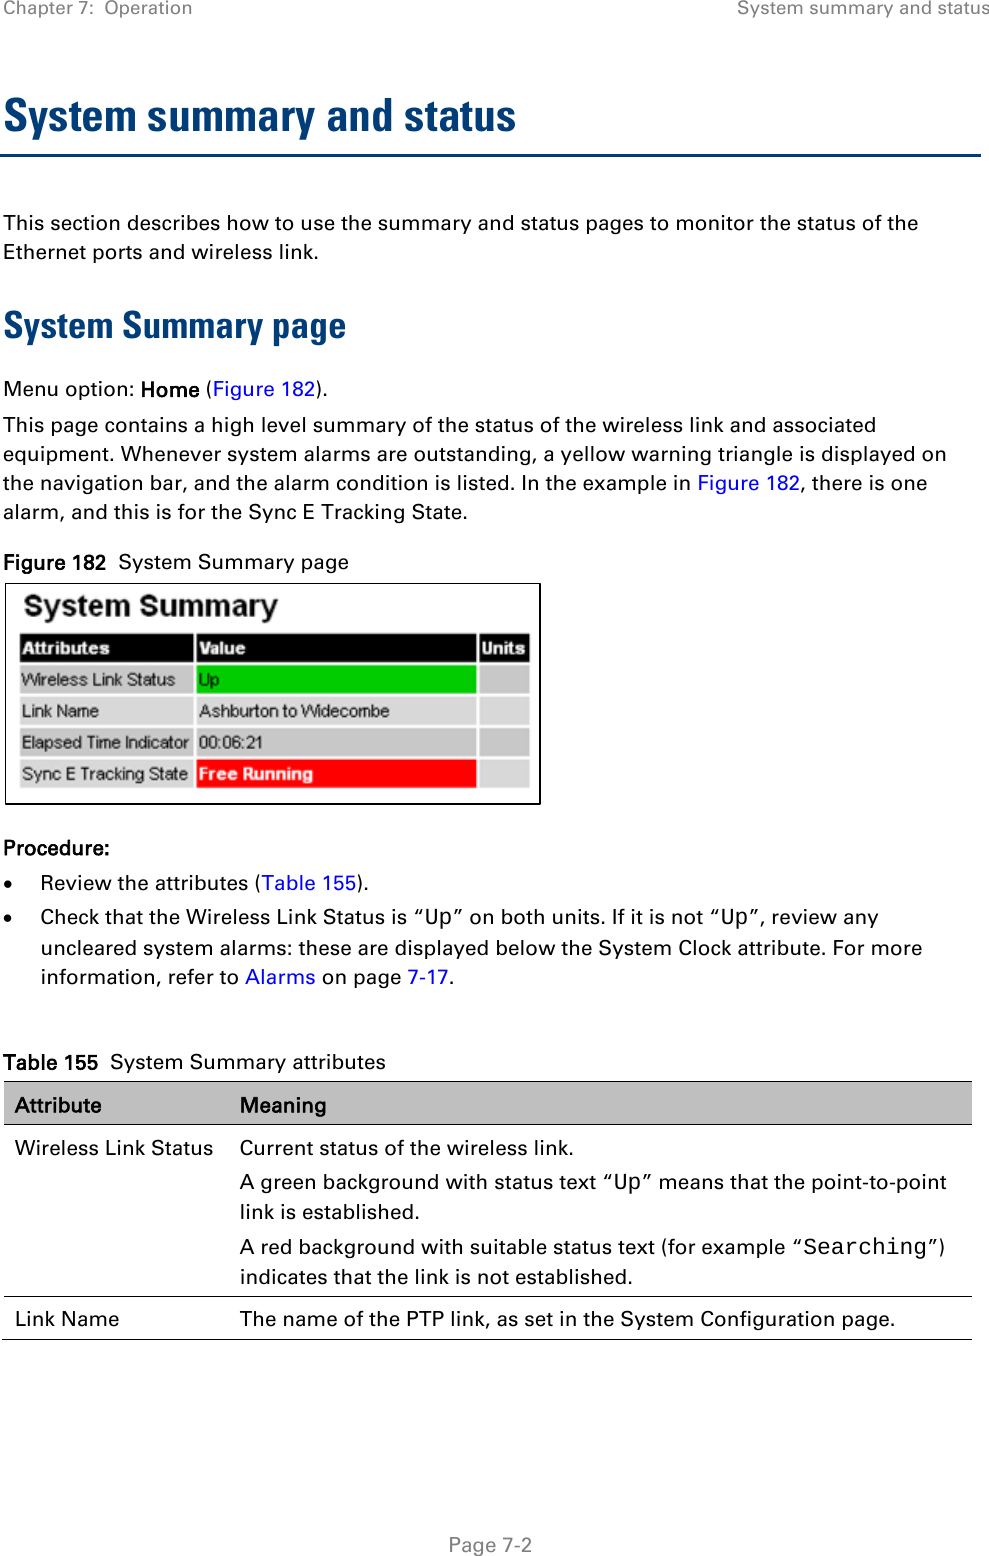 Chapter 7:  Operation System summary and status  System summary and status This section describes how to use the summary and status pages to monitor the status of the Ethernet ports and wireless link. System Summary page Menu option: Home (Figure 182). This page contains a high level summary of the status of the wireless link and associated equipment. Whenever system alarms are outstanding, a yellow warning triangle is displayed on the navigation bar, and the alarm condition is listed. In the example in Figure 182, there is one alarm, and this is for the Sync E Tracking State. Figure 182  System Summary page  Procedure: • Review the attributes (Table 155). • Check that the Wireless Link Status is “Up” on both units. If it is not “Up”, review any uncleared system alarms: these are displayed below the System Clock attribute. For more information, refer to Alarms on page 7-17.  Table 155  System Summary attributes Attribute Meaning Wireless Link Status Current status of the wireless link.  A green background with status text “Up” means that the point-to-point link is established. A red background with suitable status text (for example “Searching”) indicates that the link is not established.  Link Name The name of the PTP link, as set in the System Configuration page.   Page 7-2 